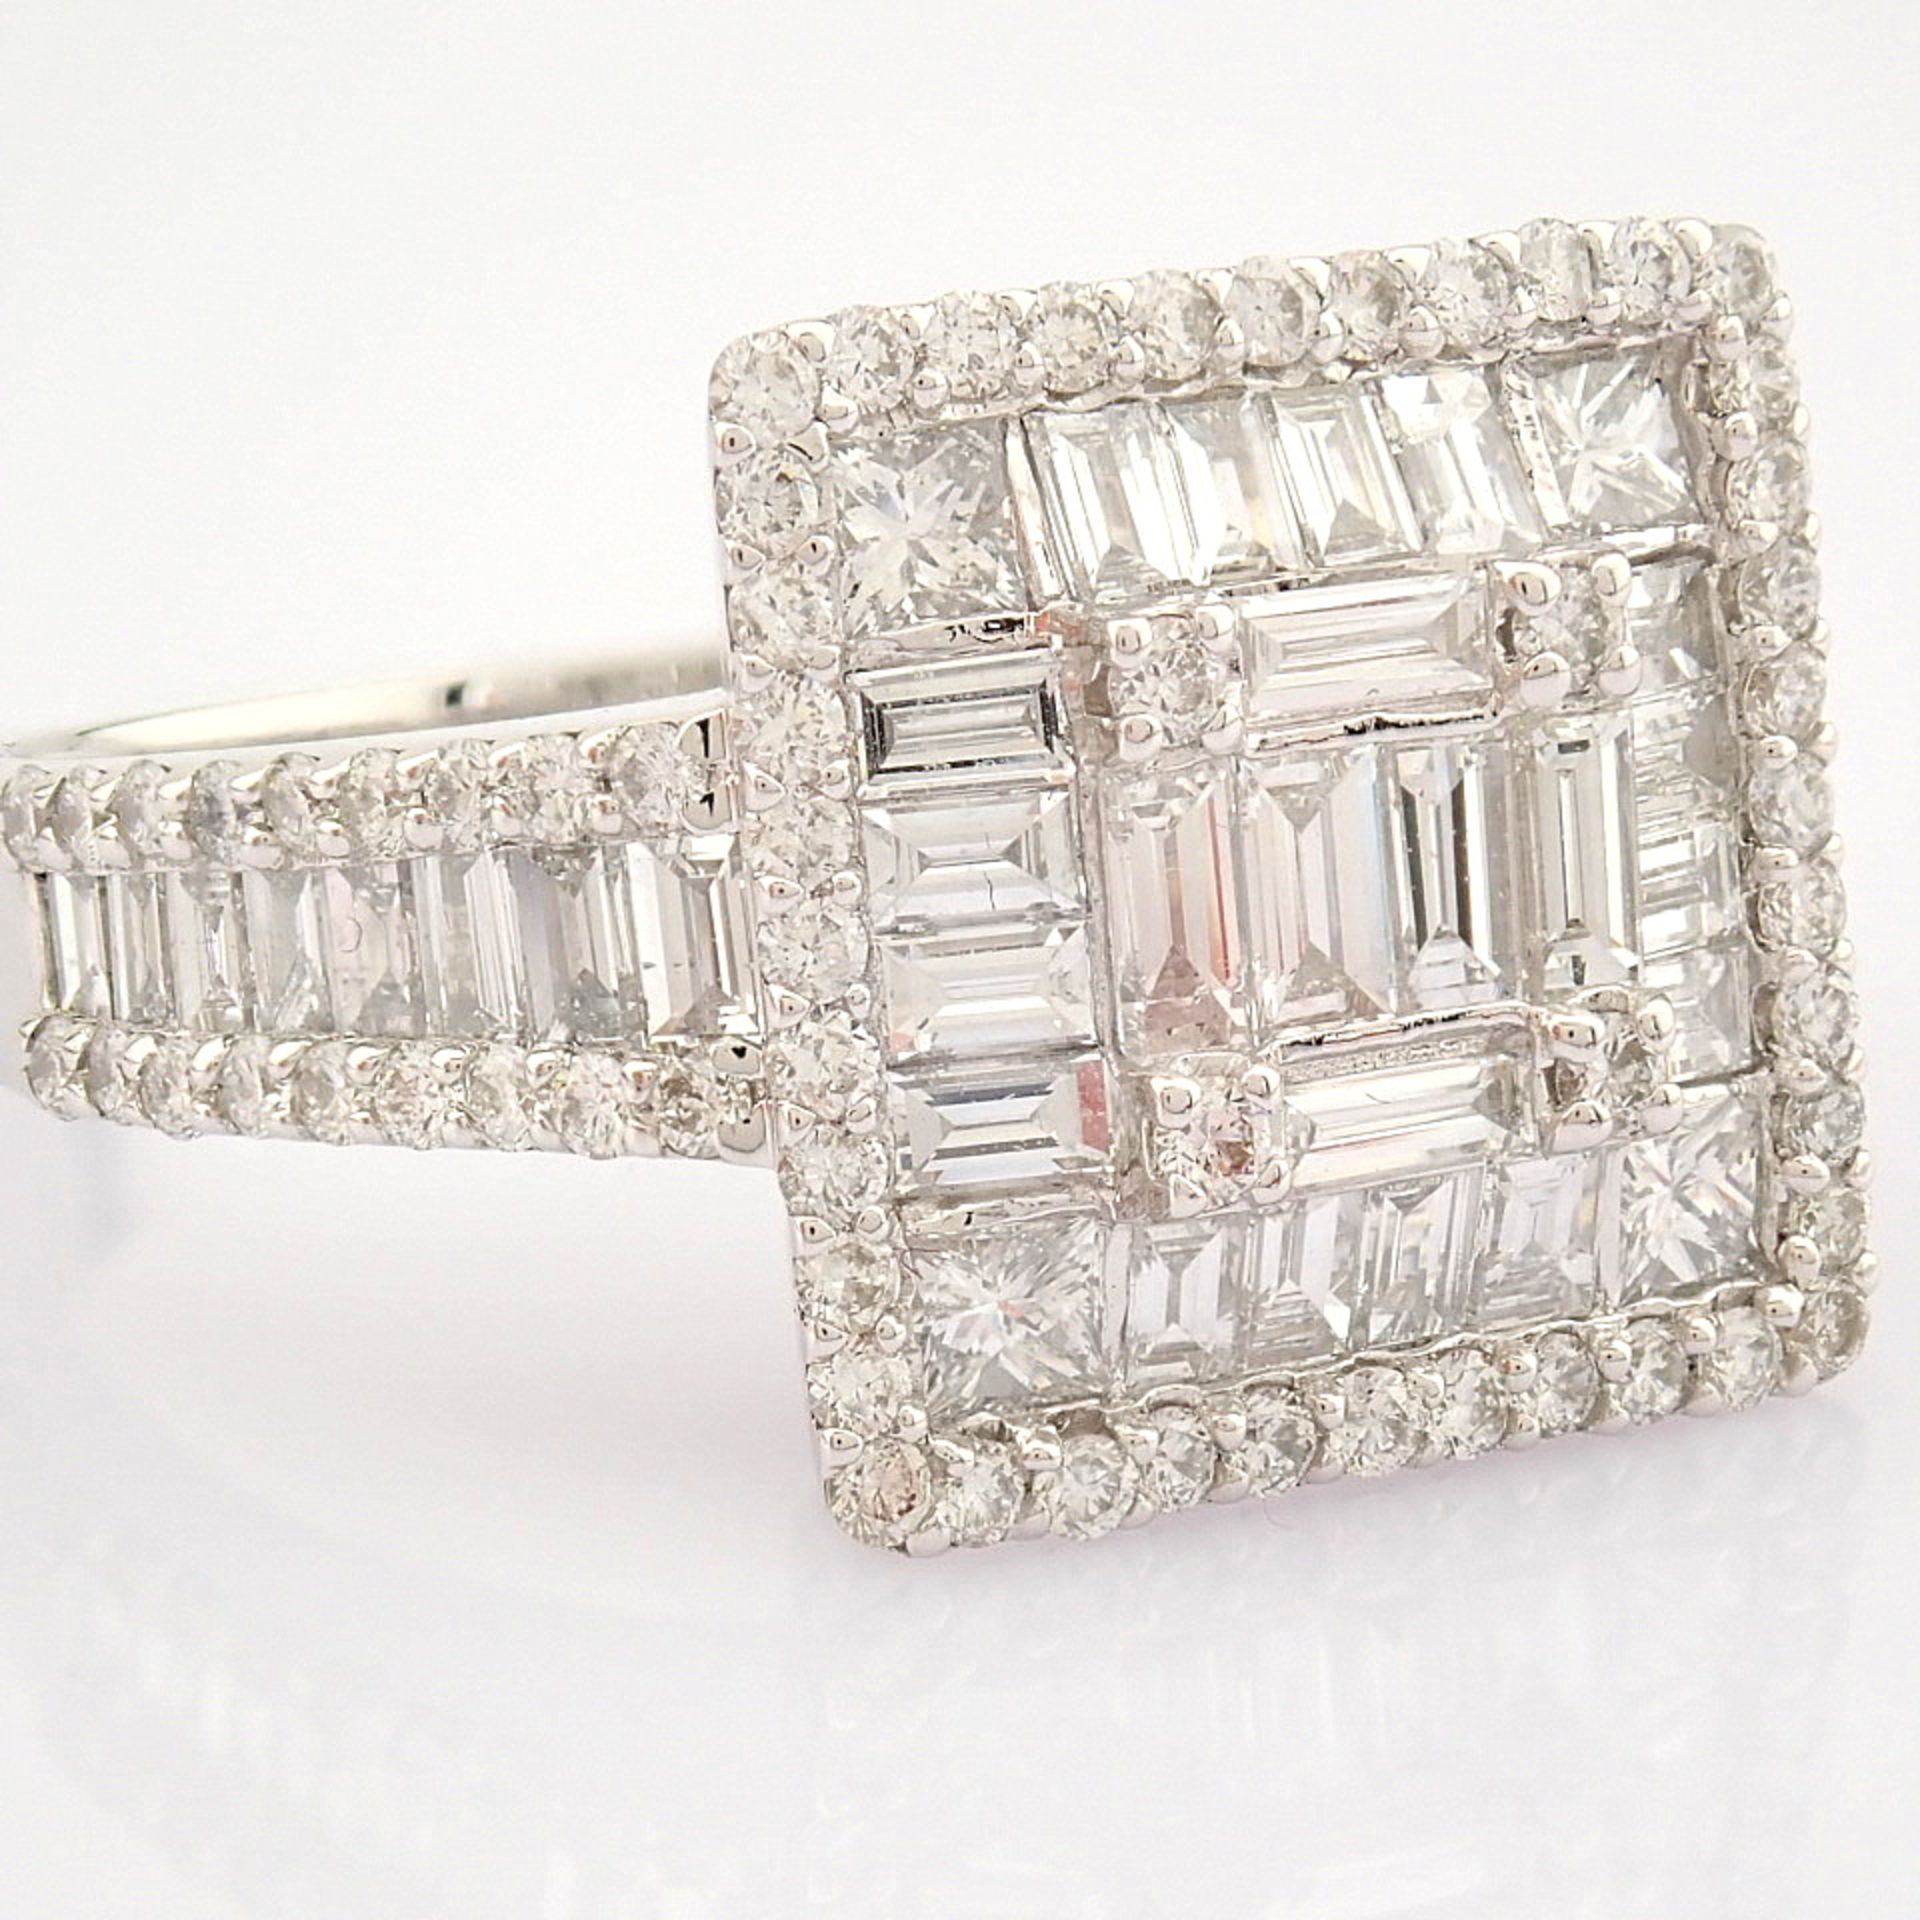 Certificated 14K White Gold Baguette Diamond & Diamond Ring (Total 1.38 ct Stone) - Image 6 of 12